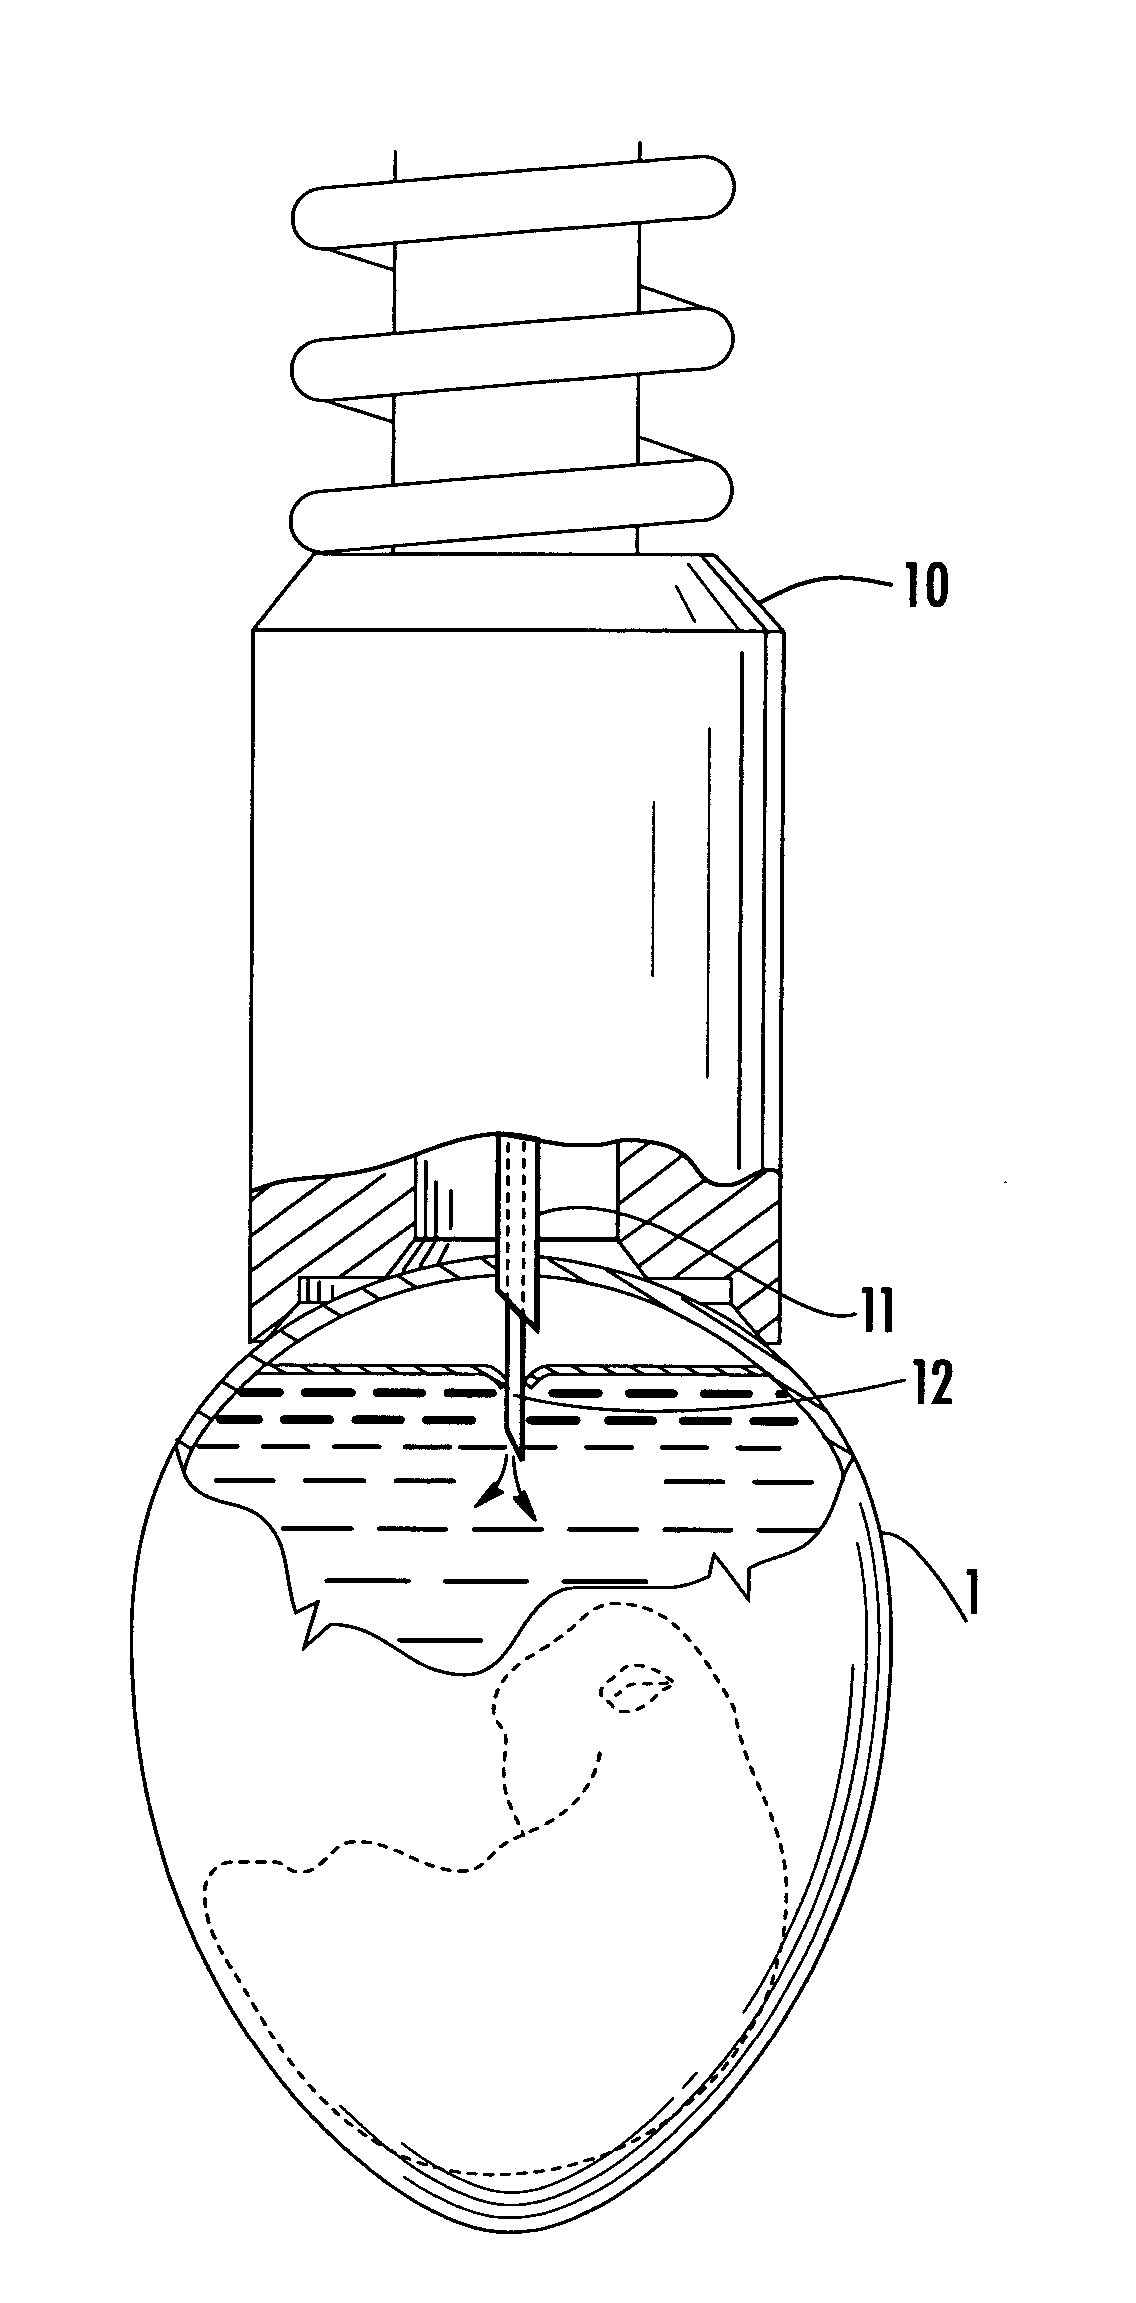 Systems and methods for sanitizing egg processing equipment